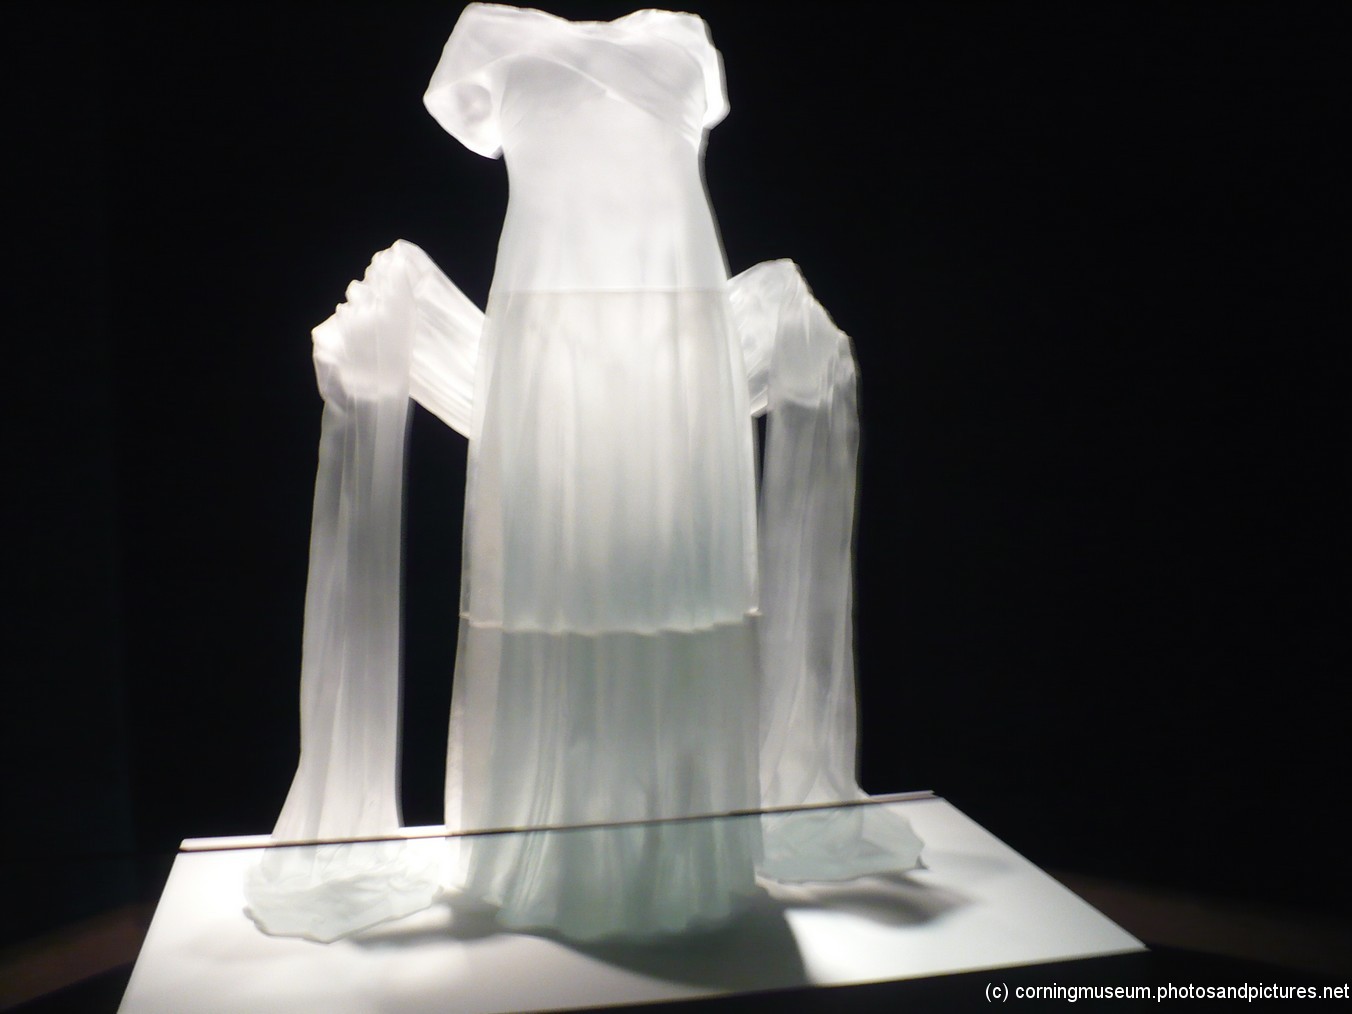 Floating white dress and sash glass art at Corning Museum of Glass.jpg
